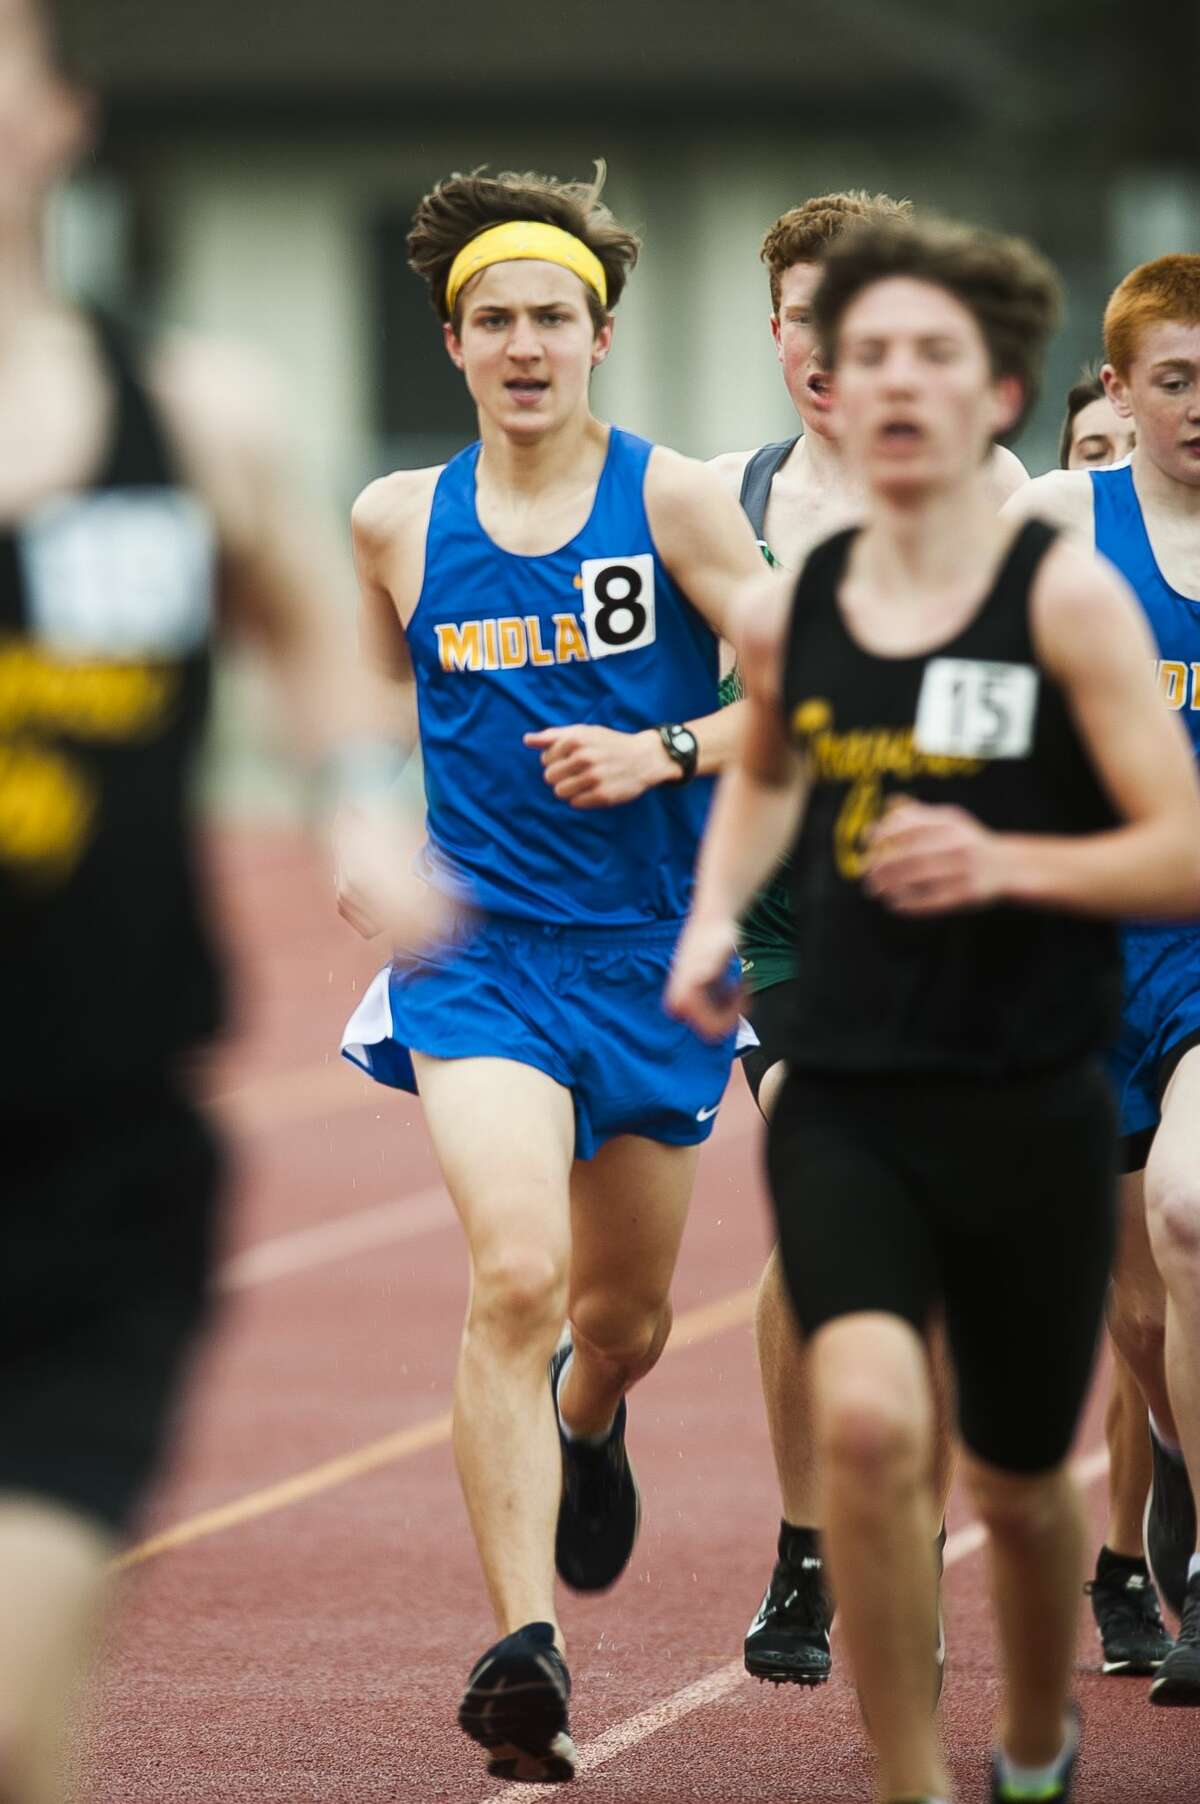 Midland's Nathan Striebel competes in the 1600 meter run during the Graves/Swayze Relays on Thursday, April 18, 2019 at Midland Community Stadium. (Katy Kildee/kkildee@mdn.net)